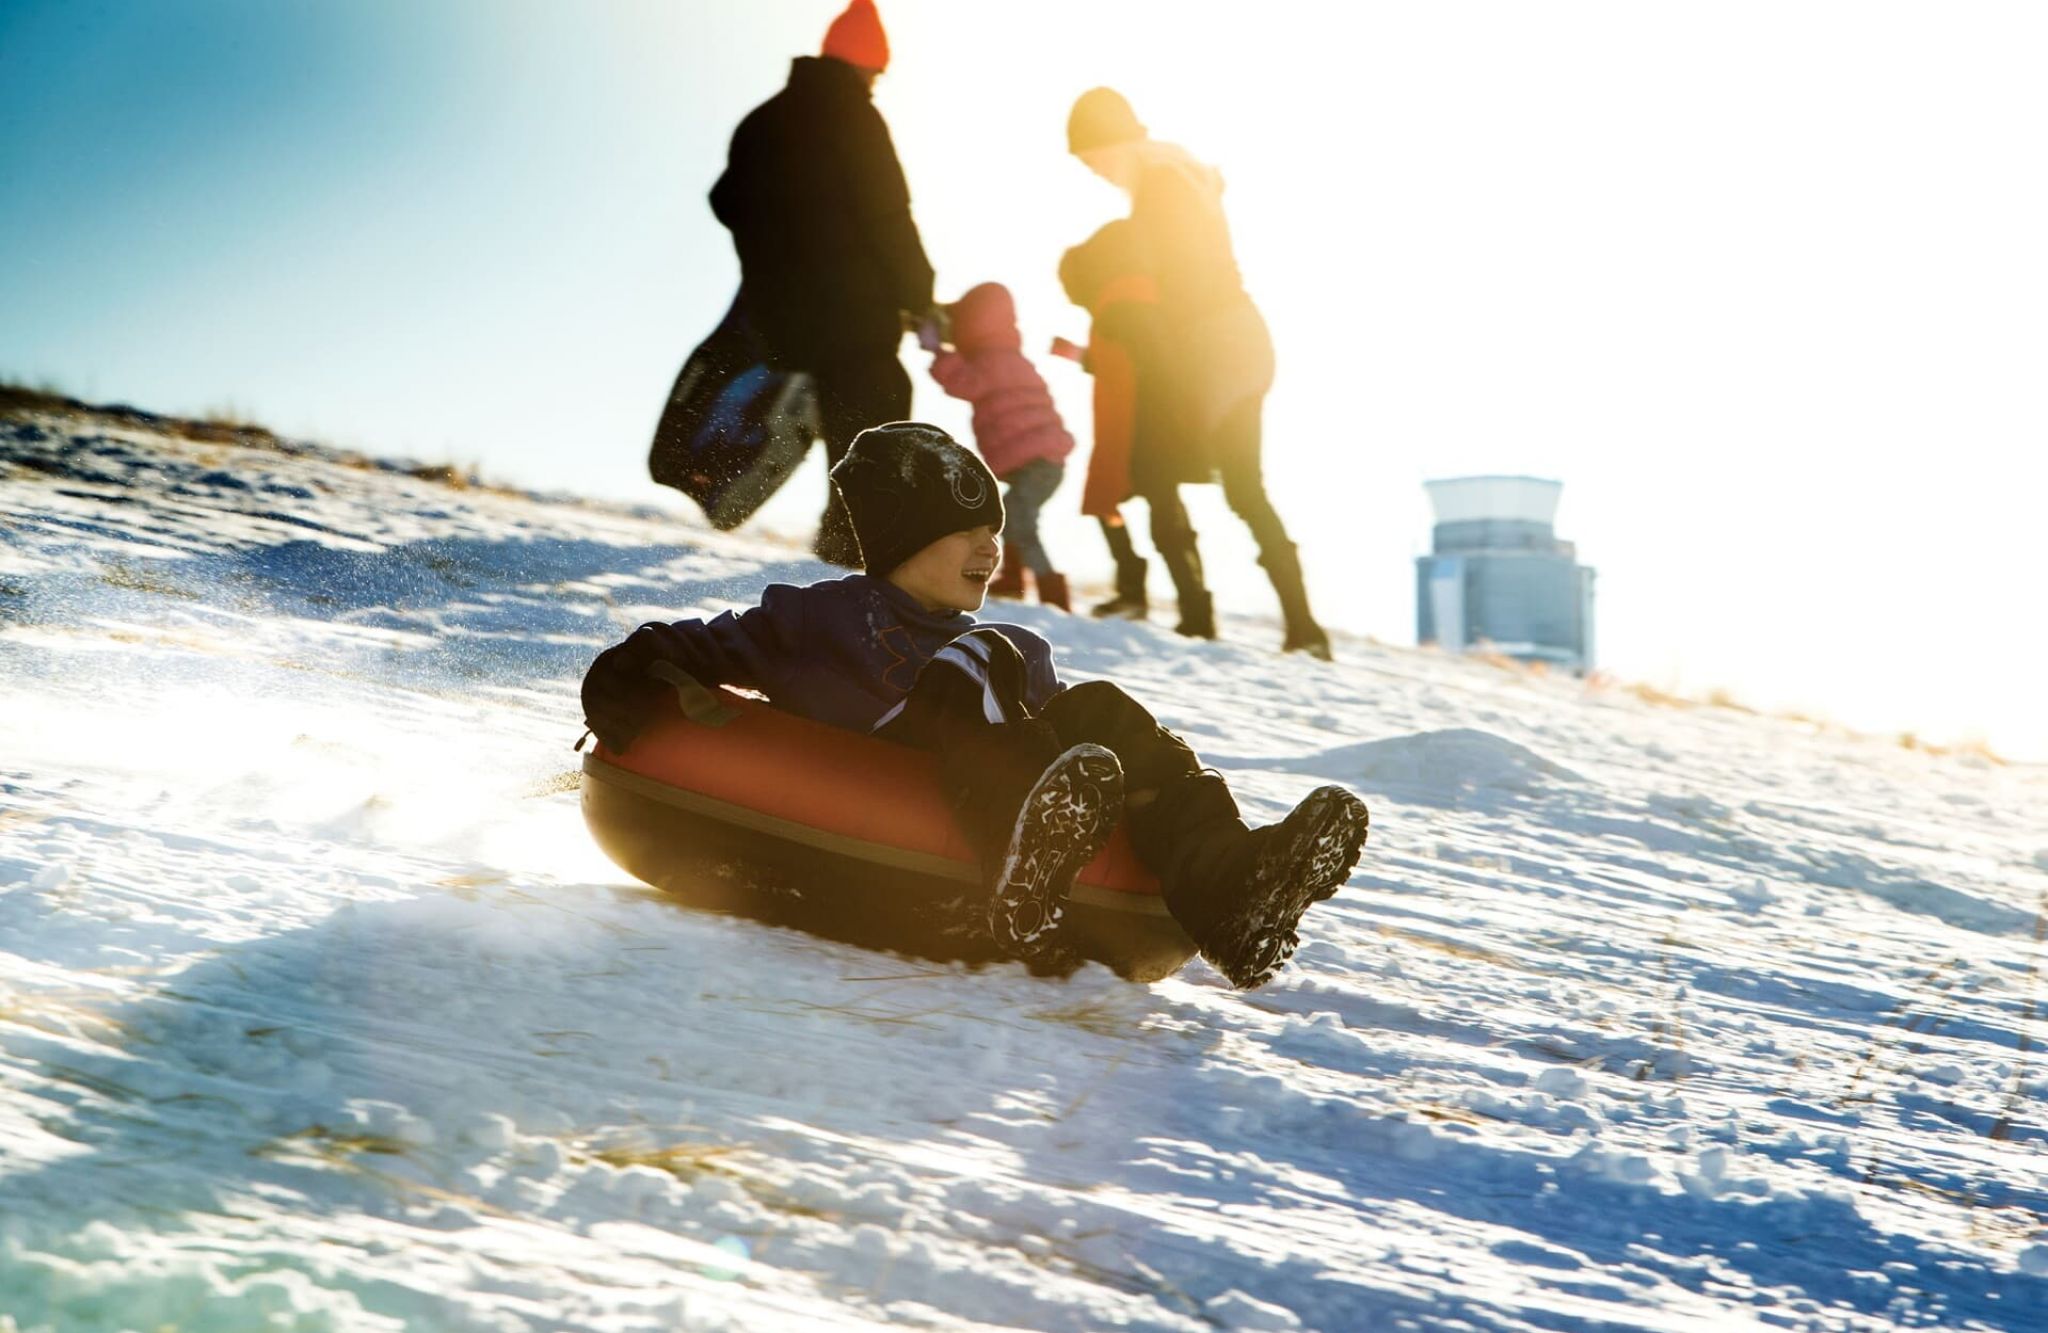 Child sledding down a snowy hill in an inner tube